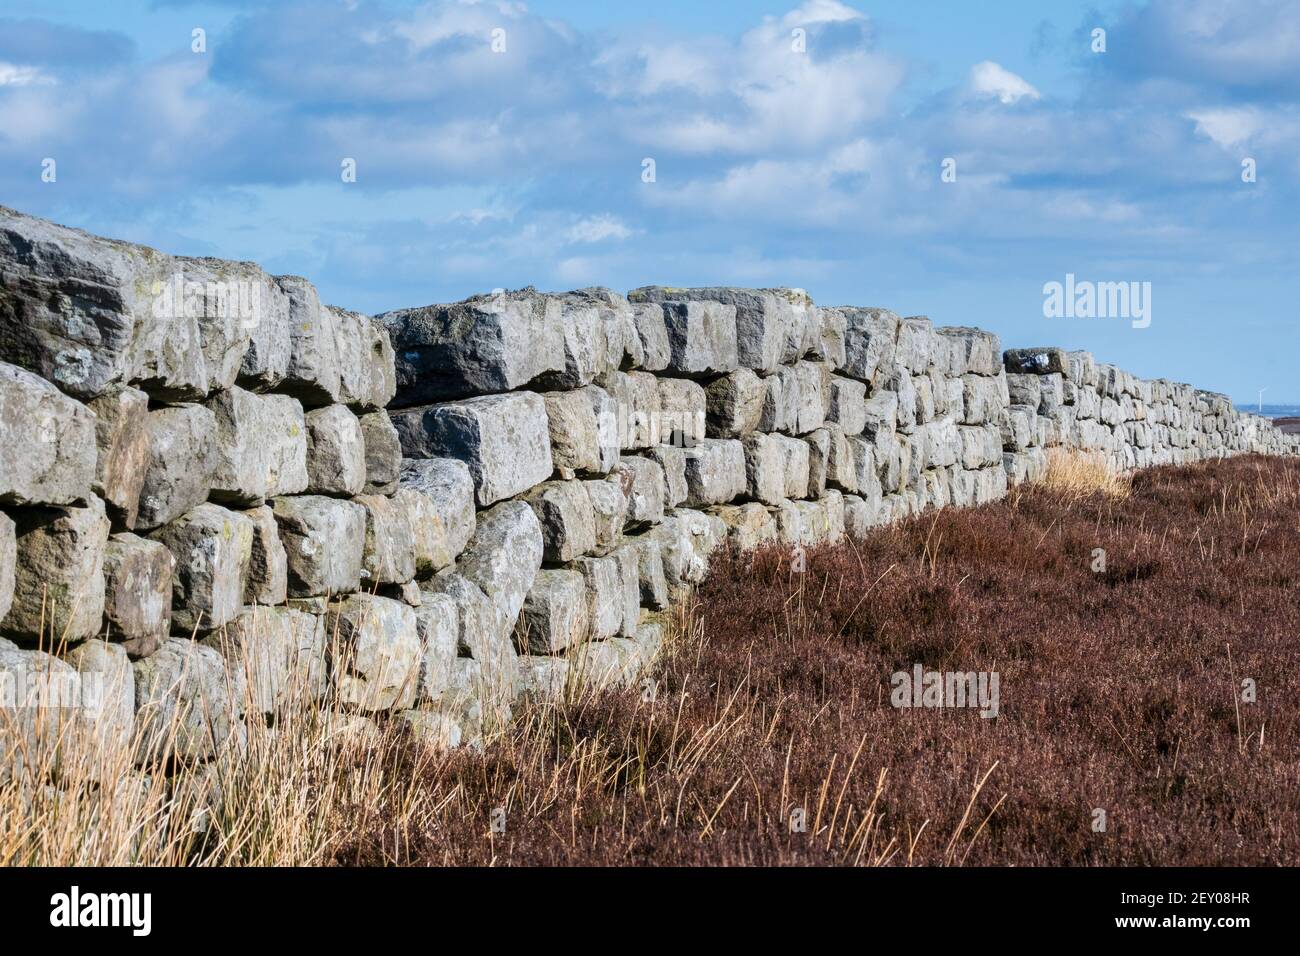 Long section of drystone wall Stock Photo